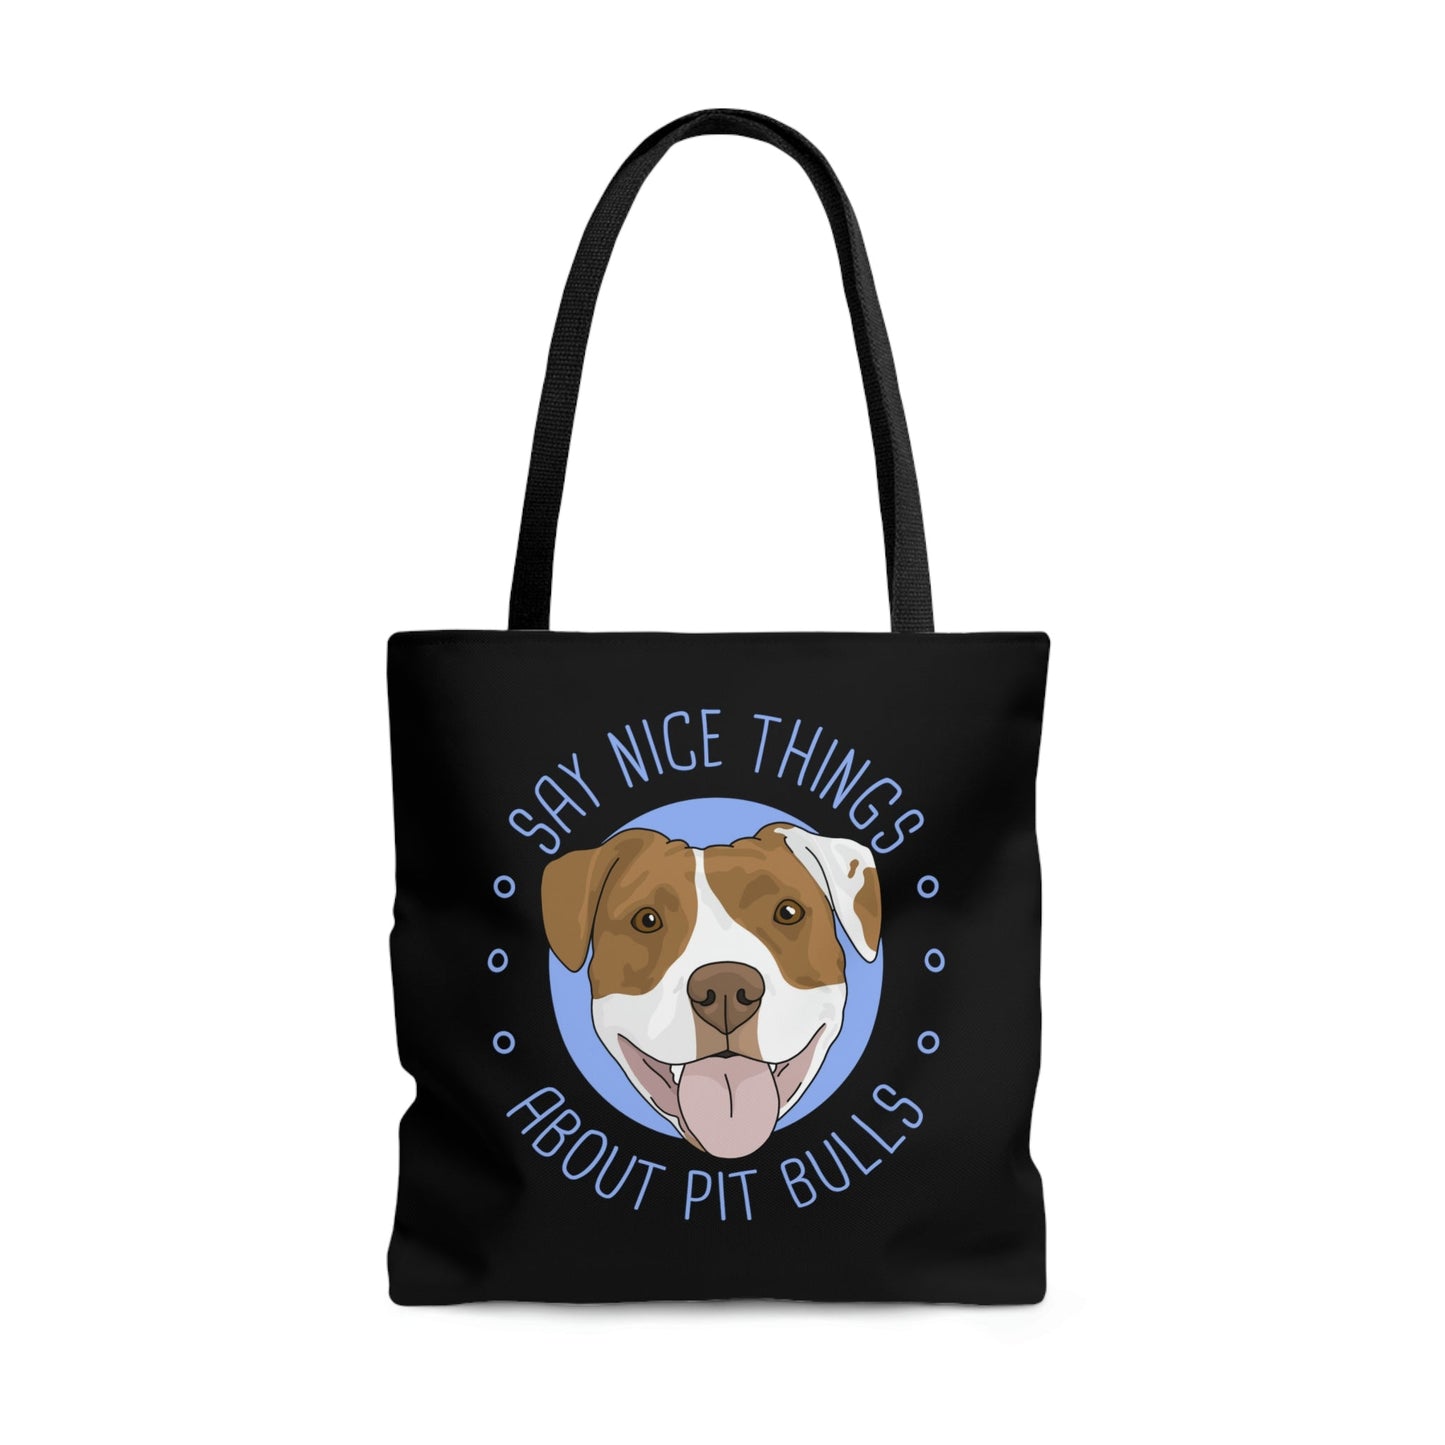 Say Nice Things About Pit Bulls | Tote Bag - Detezi Designs-29955124899745132835